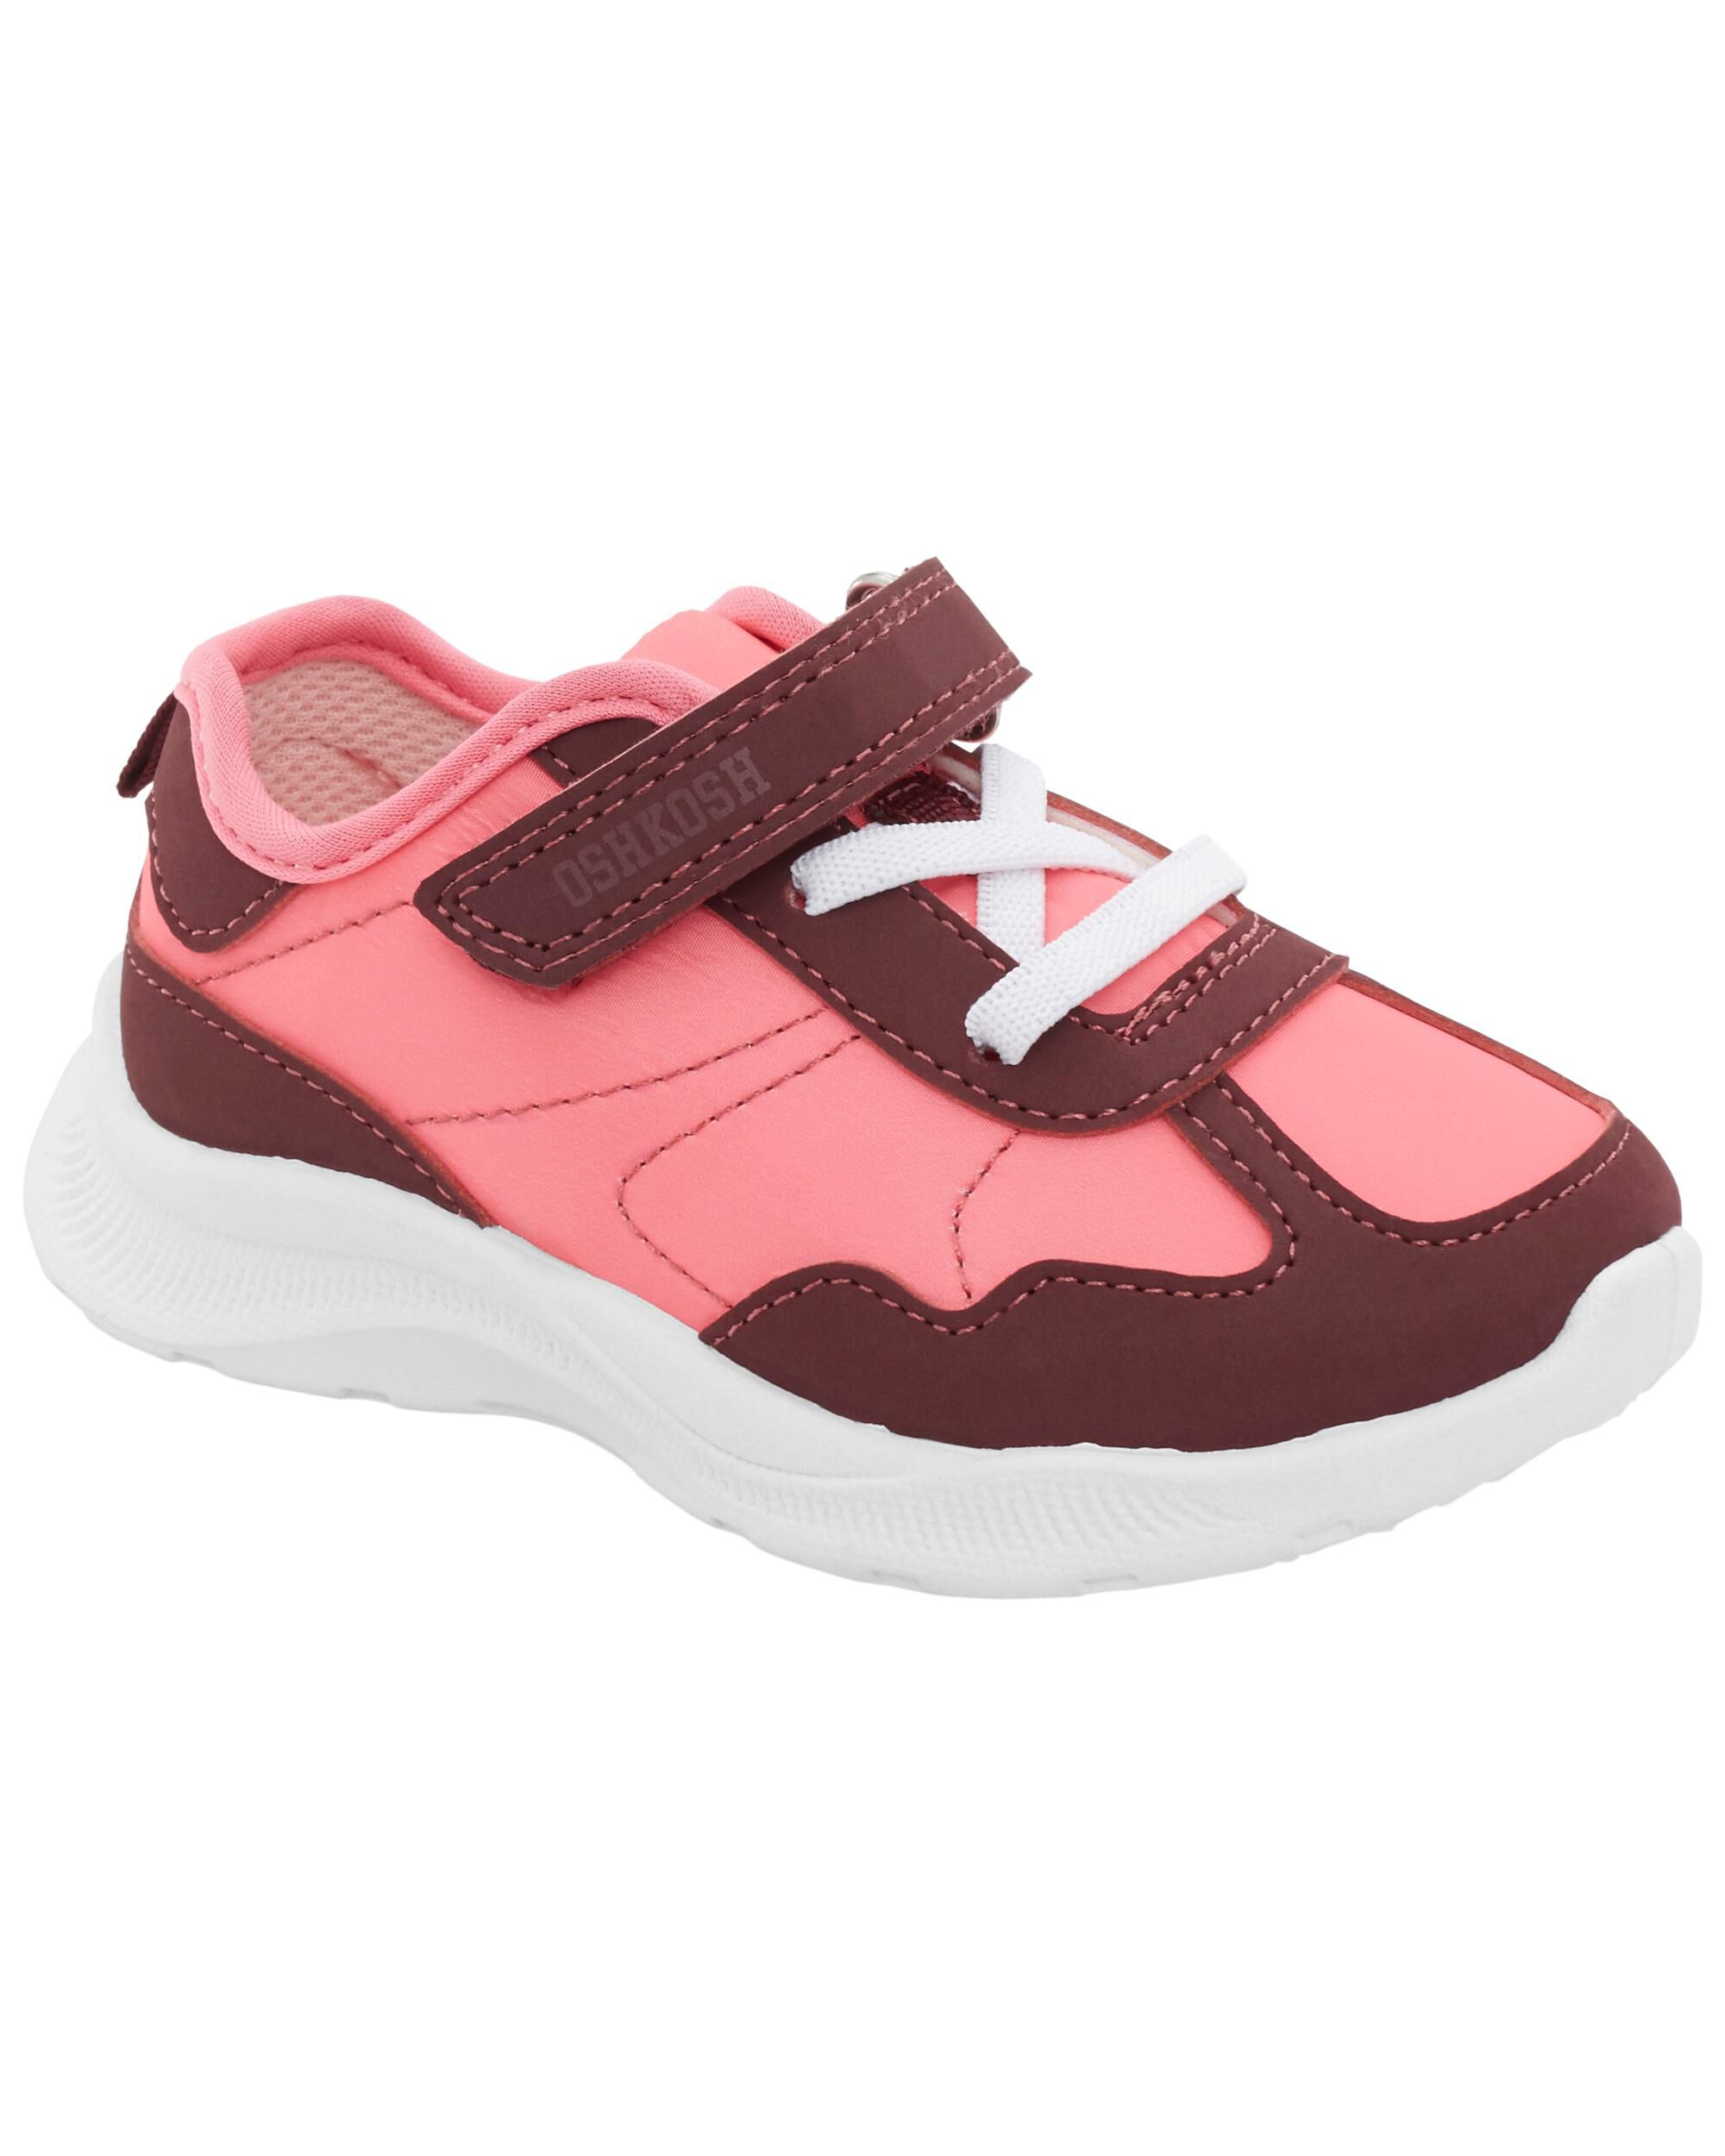 Toddler Moxie Color Block Sneakers Carter's